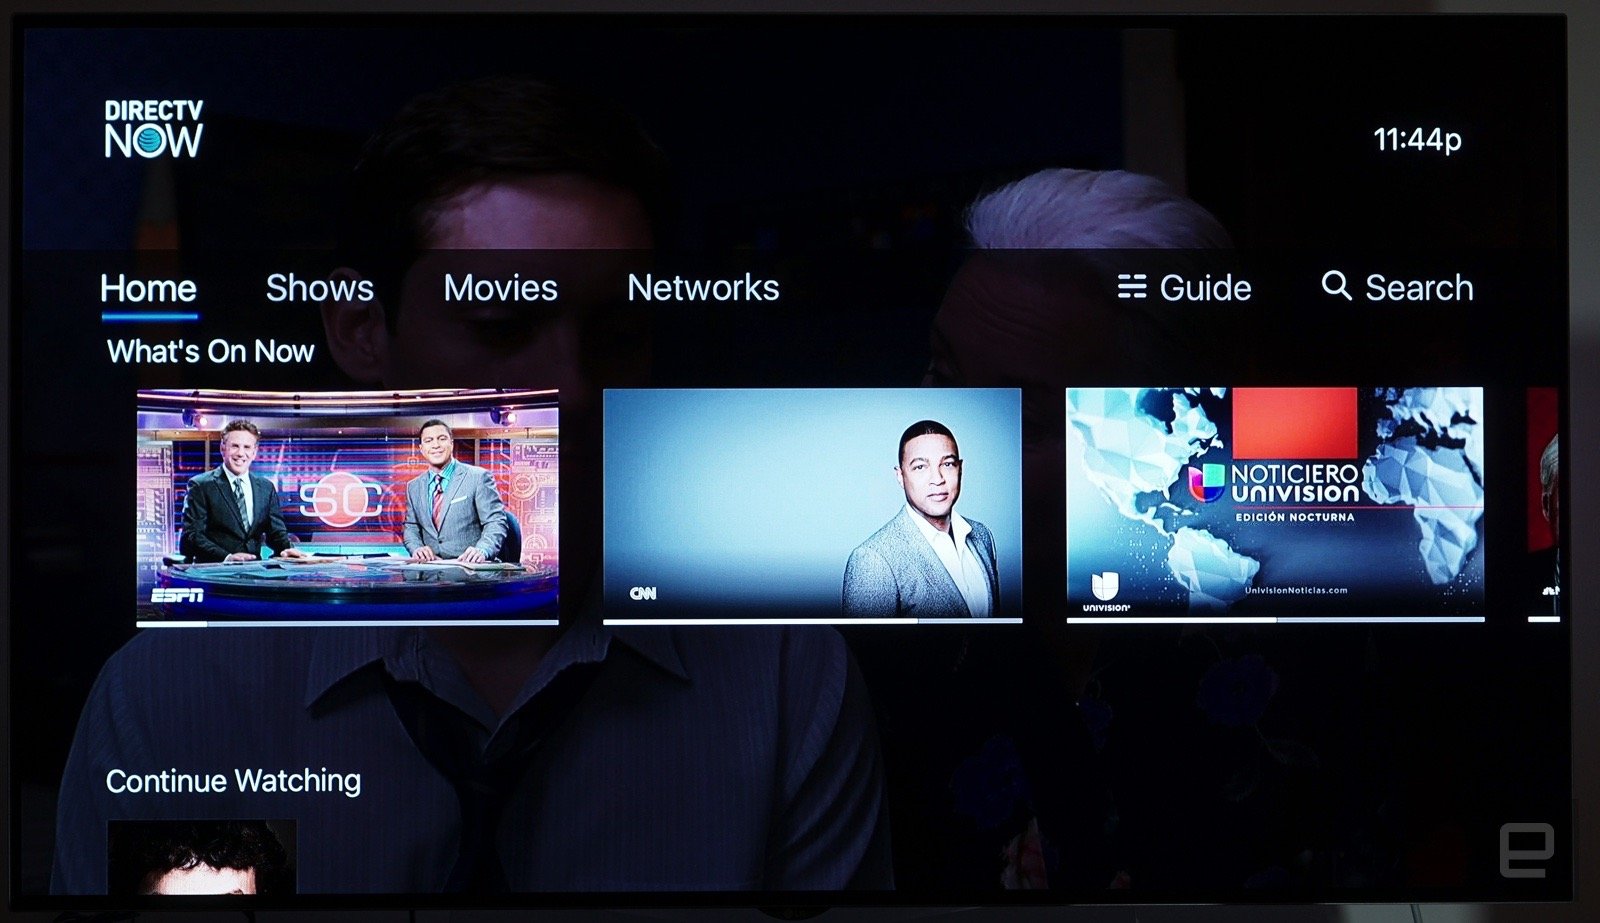 DirecTV Now as it currently appears on Apple TV